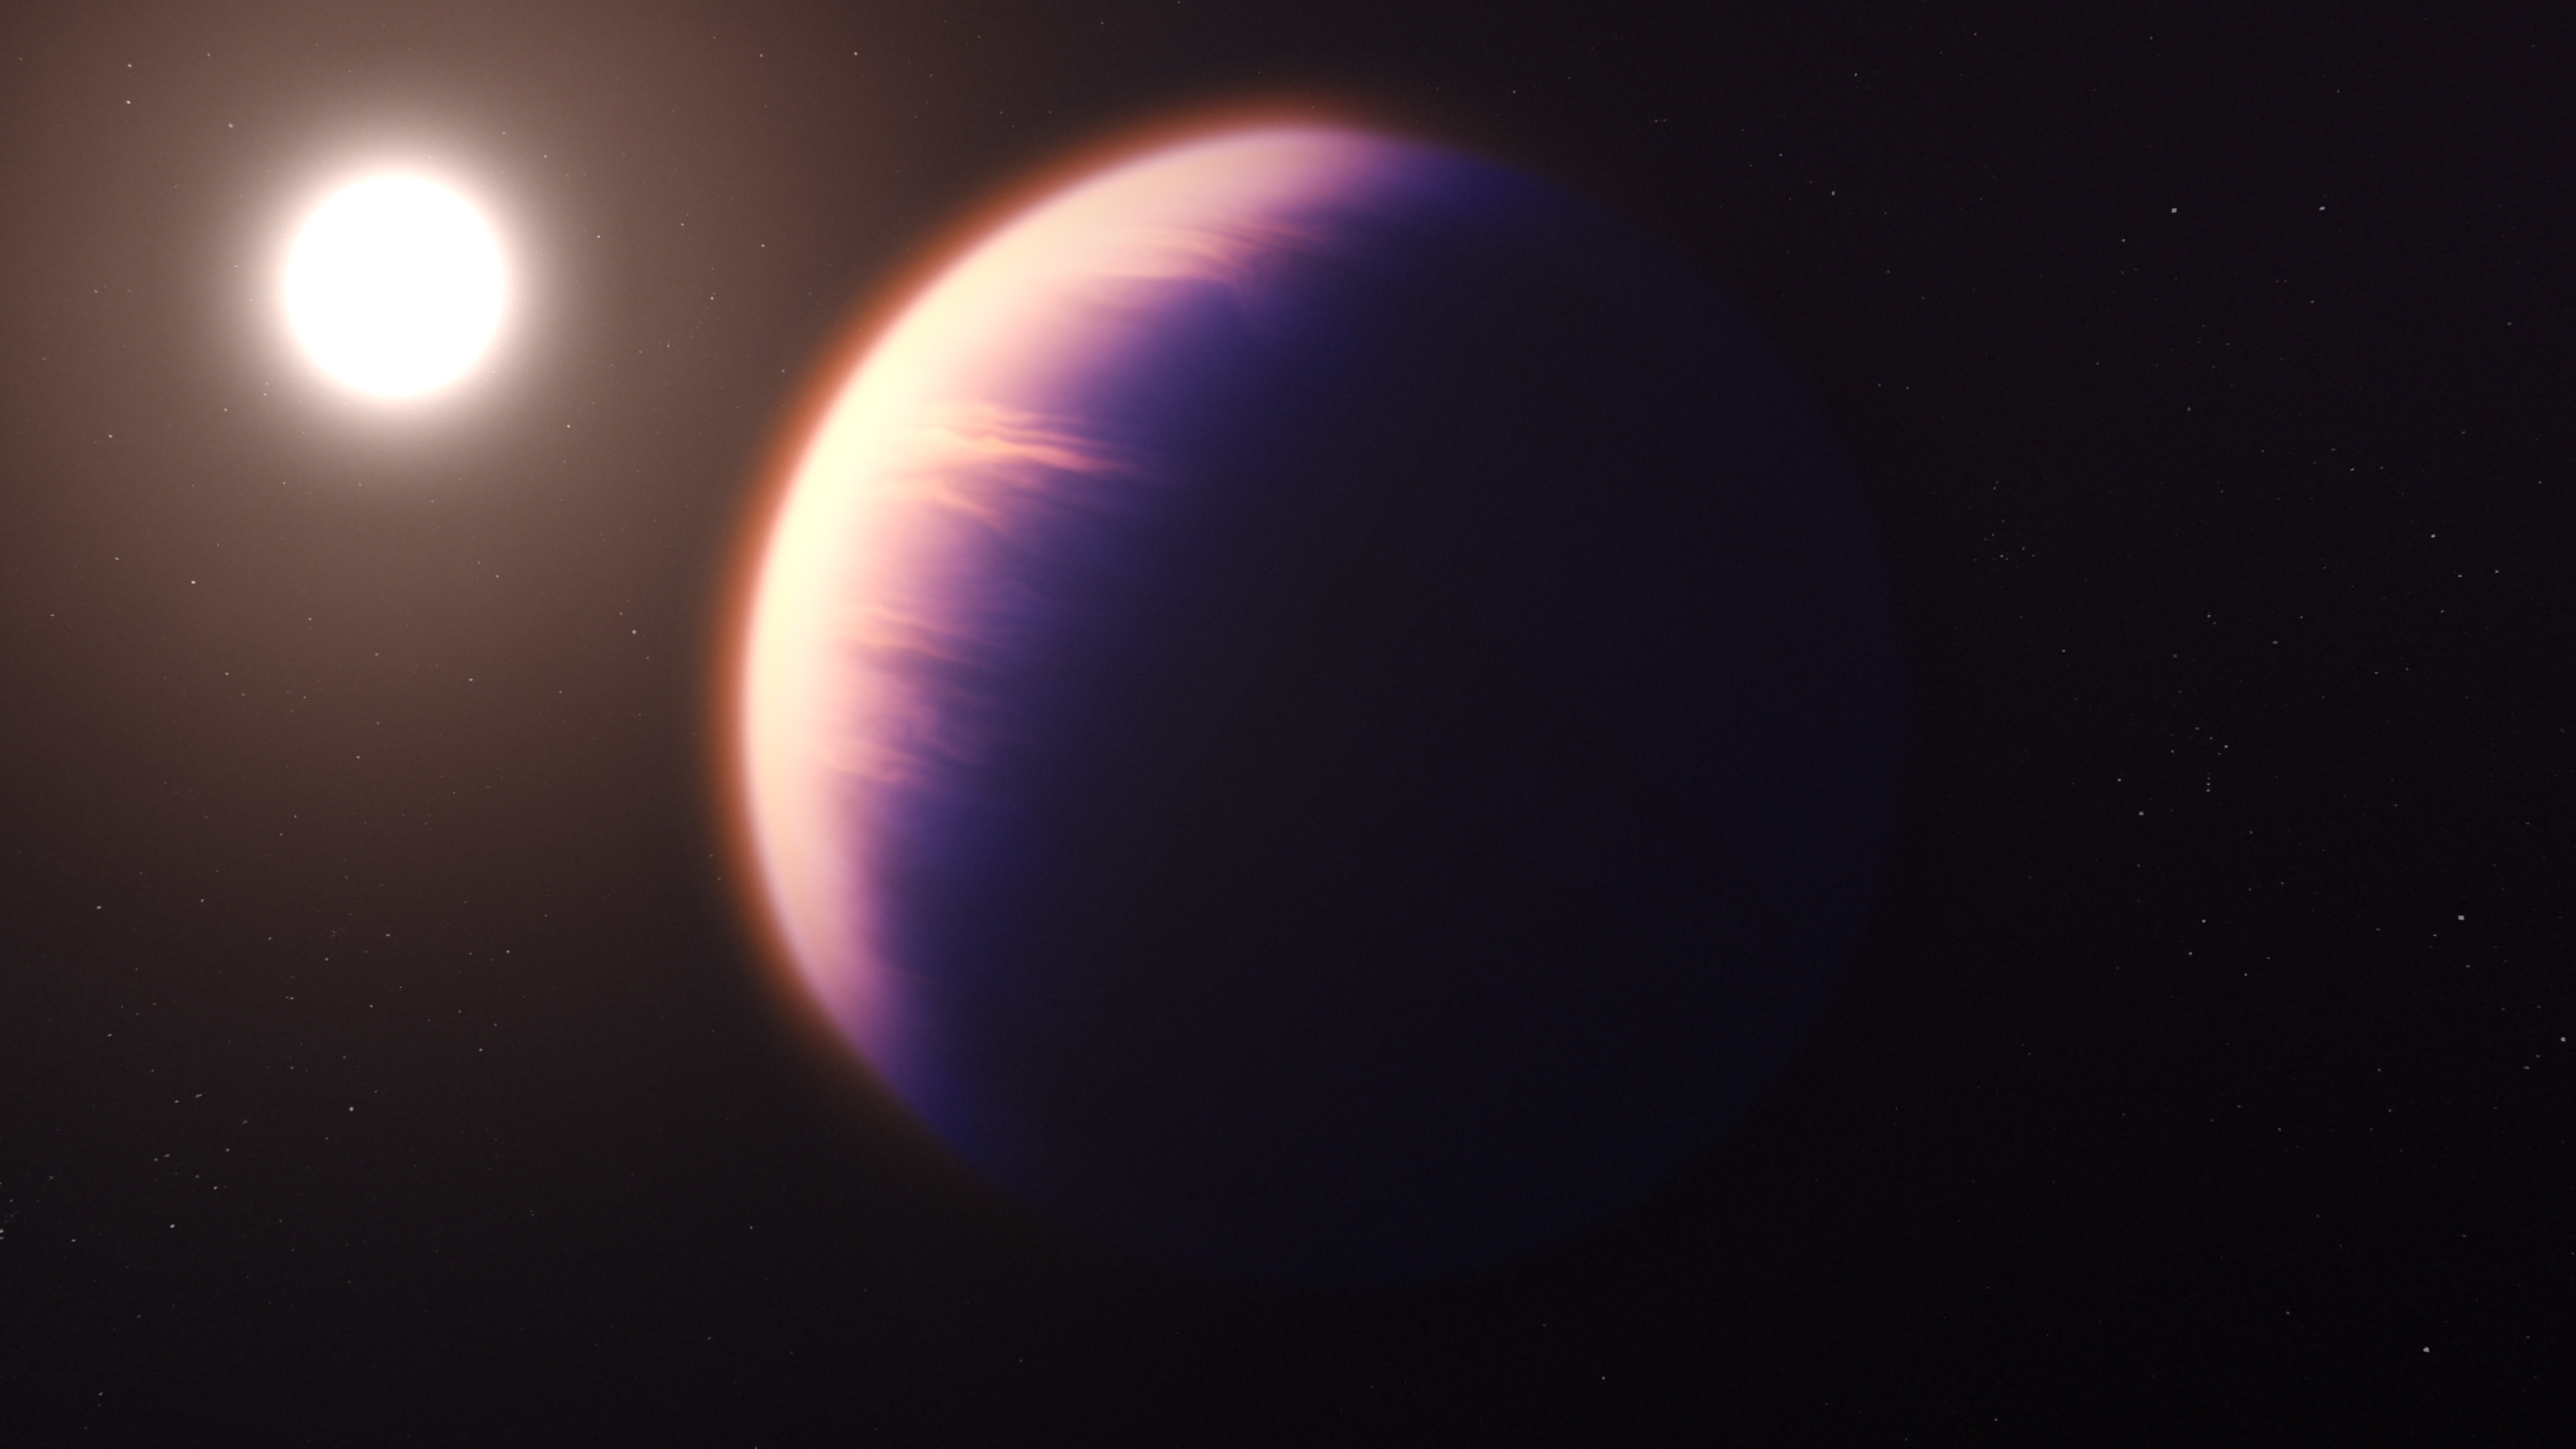 An illustration shows the exoplanet WASP-39 b to the right of its star. Credit: NASA, ESA, CSA, Joseph Olmsted (STScI). Click image to download hi-res version.